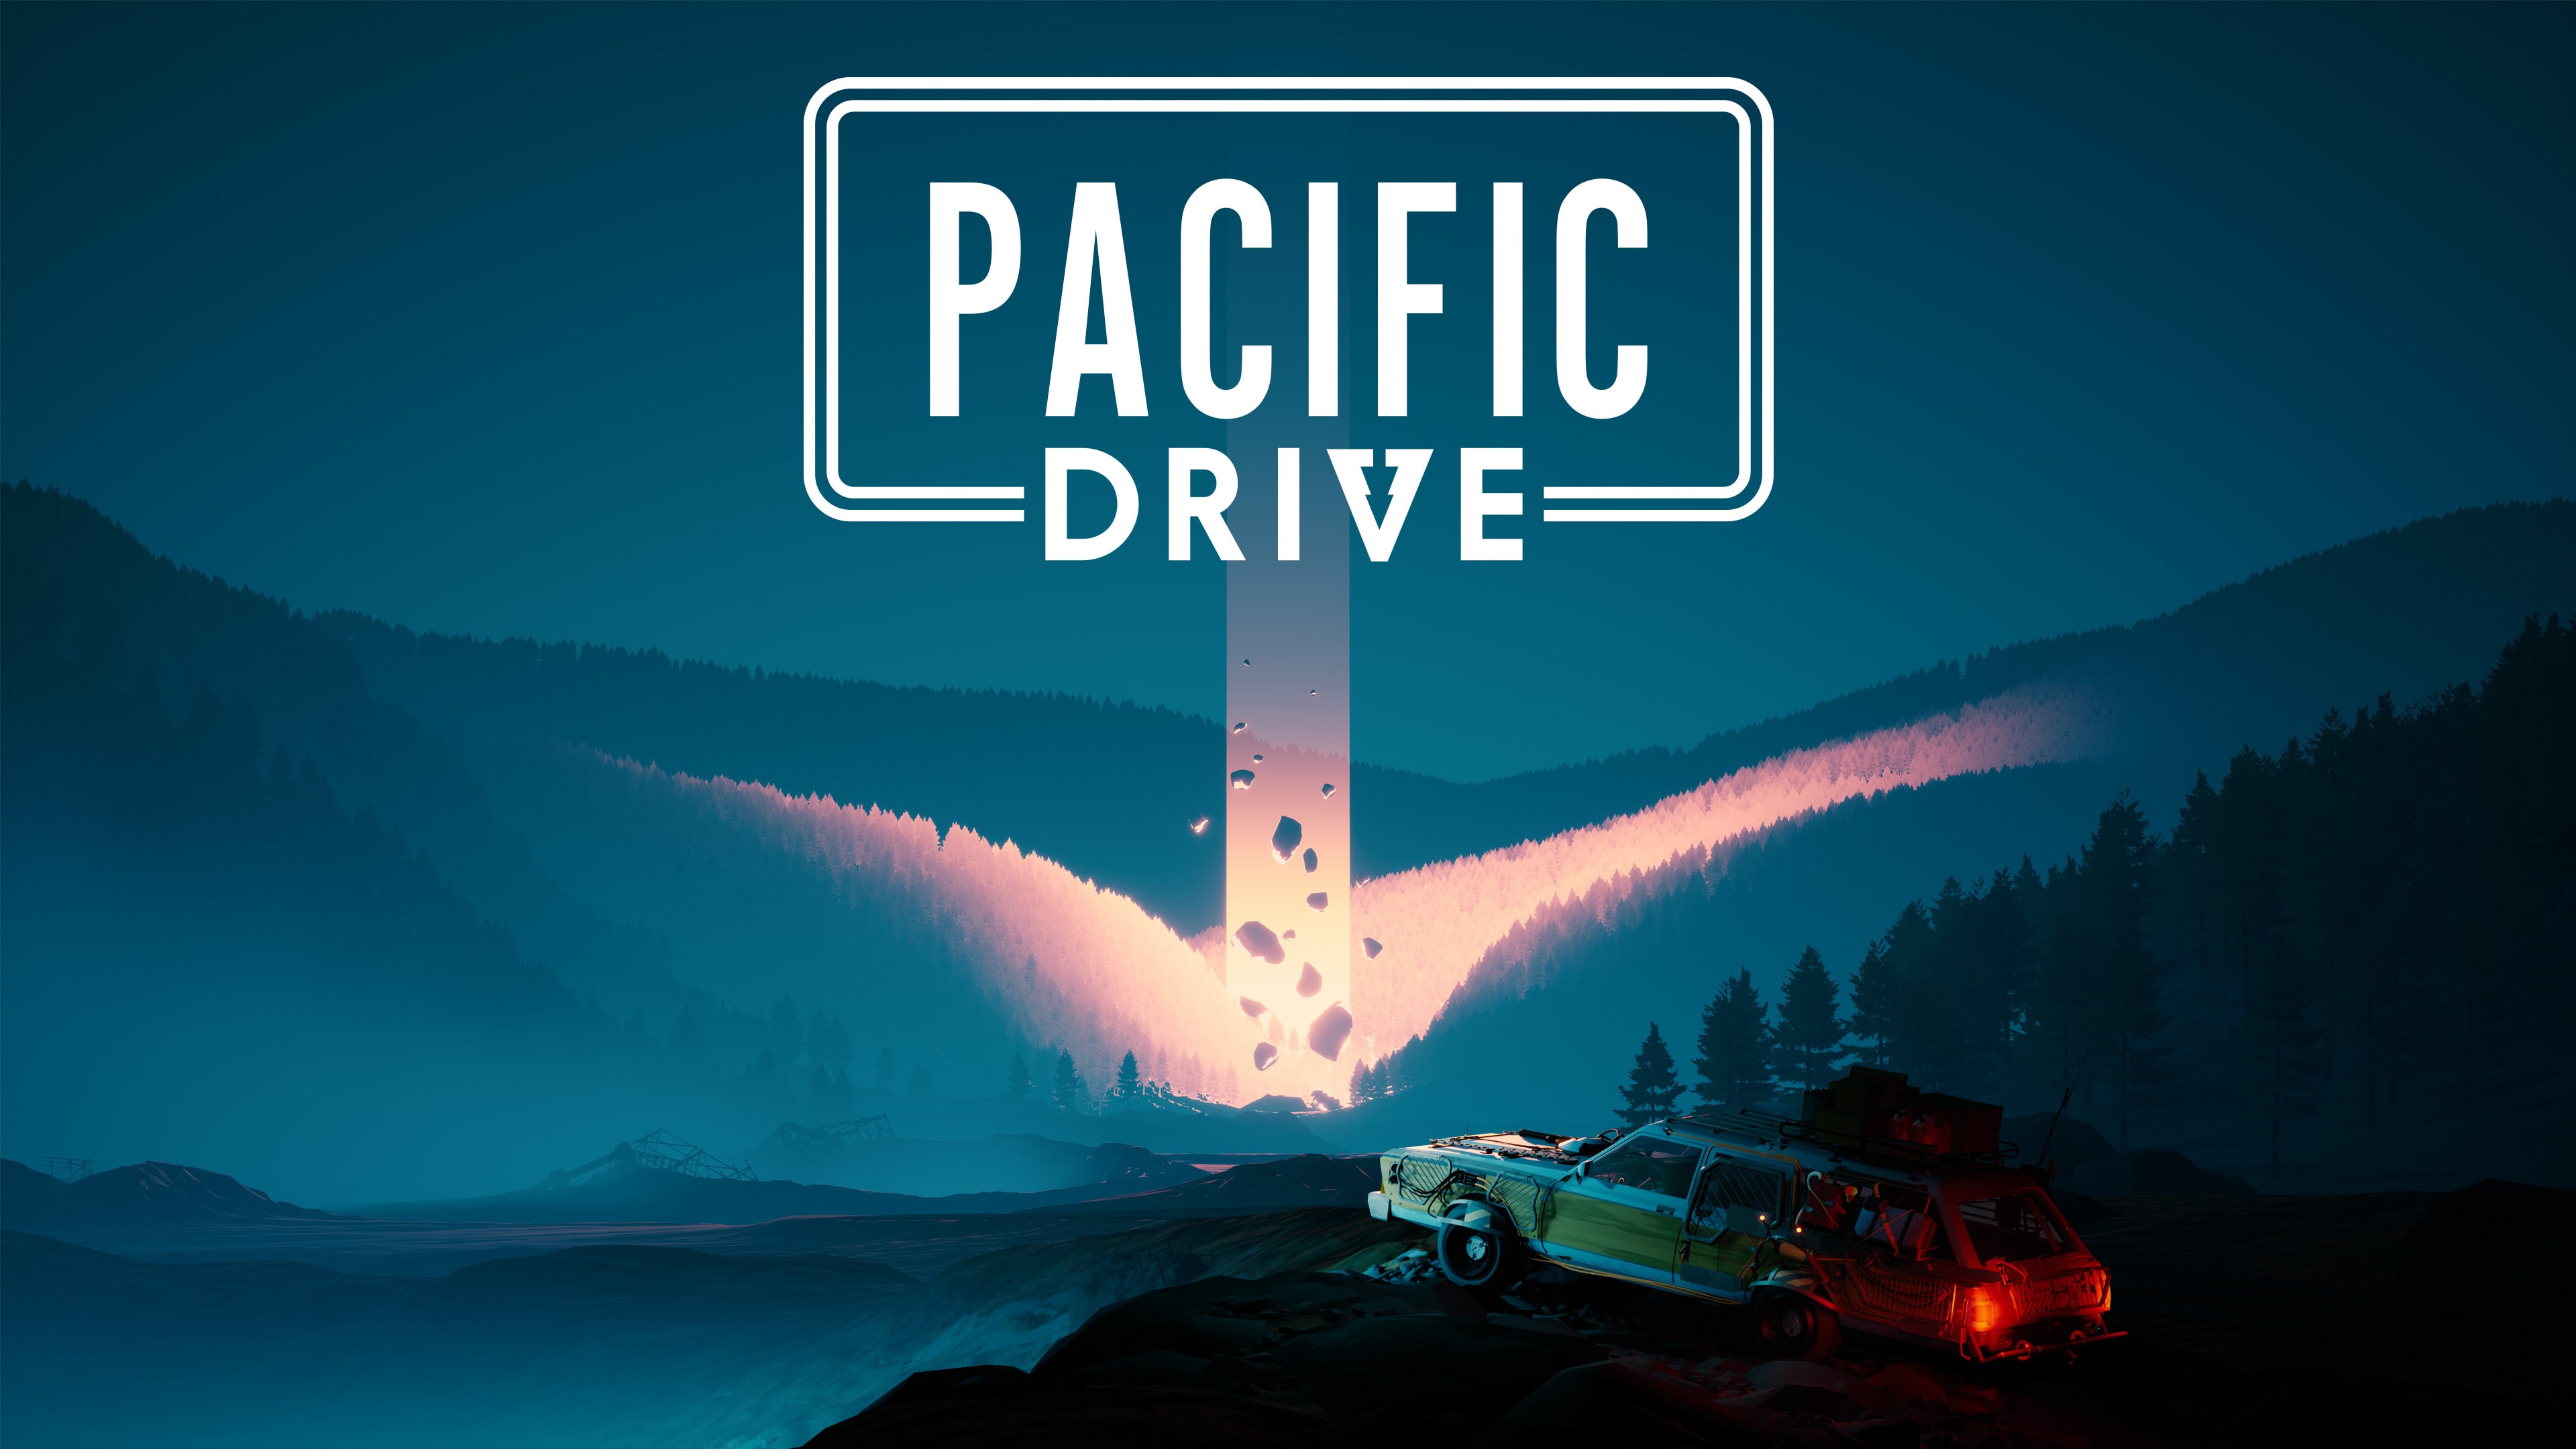 Pacific Drive (Simplified Chinese, English, Korean, Japanese, Traditional Chinese)